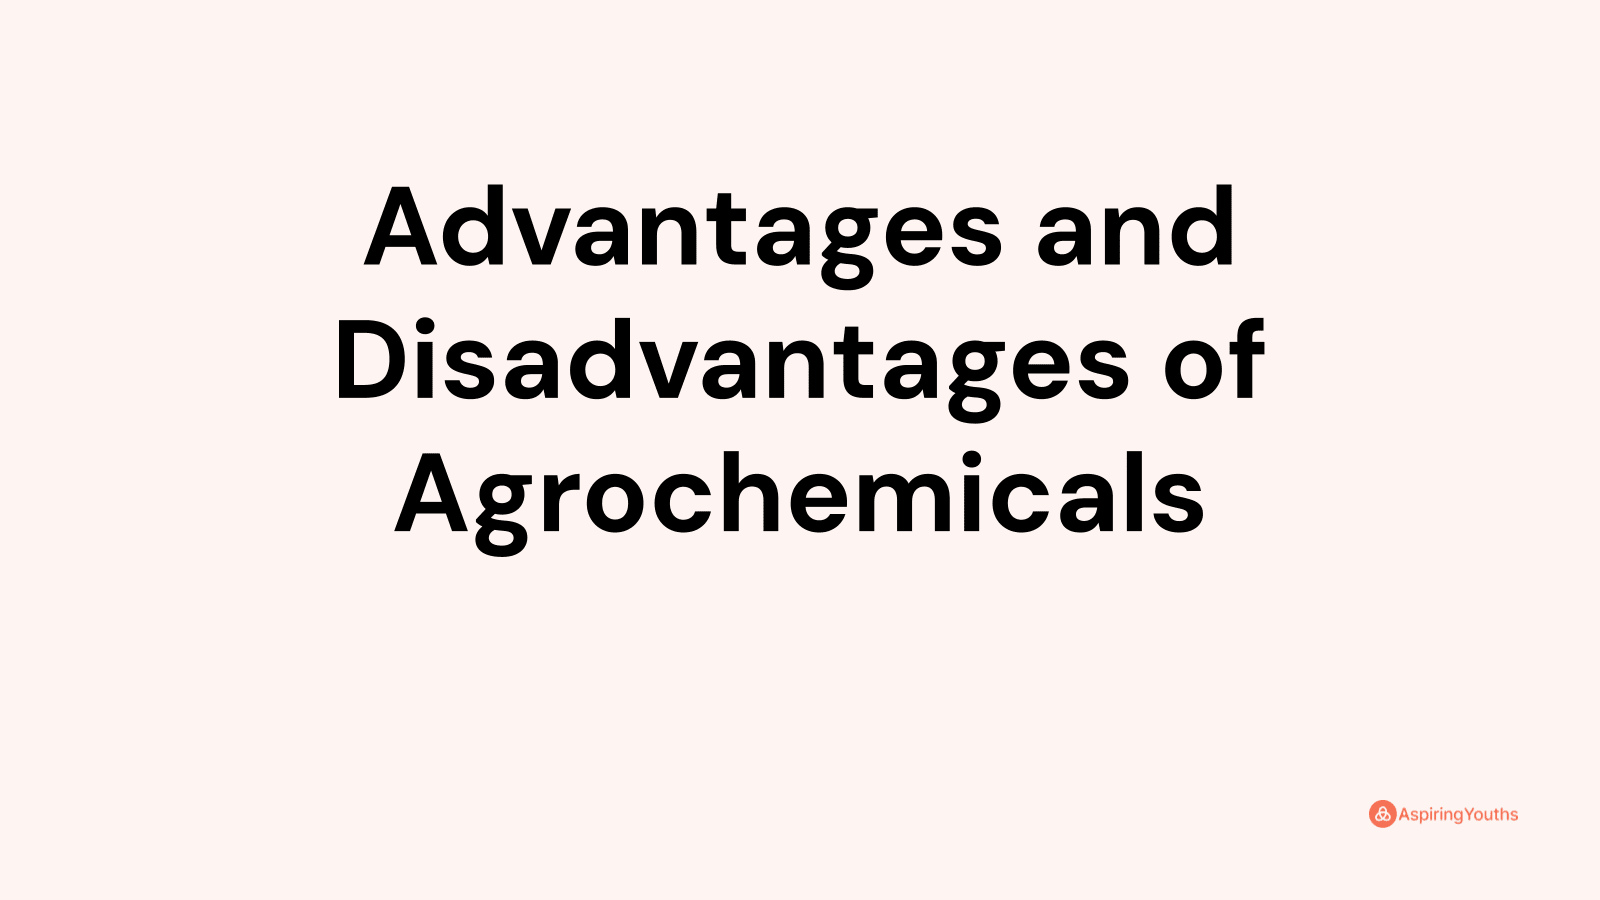 Advantages and disadvantages of Agrochemicals